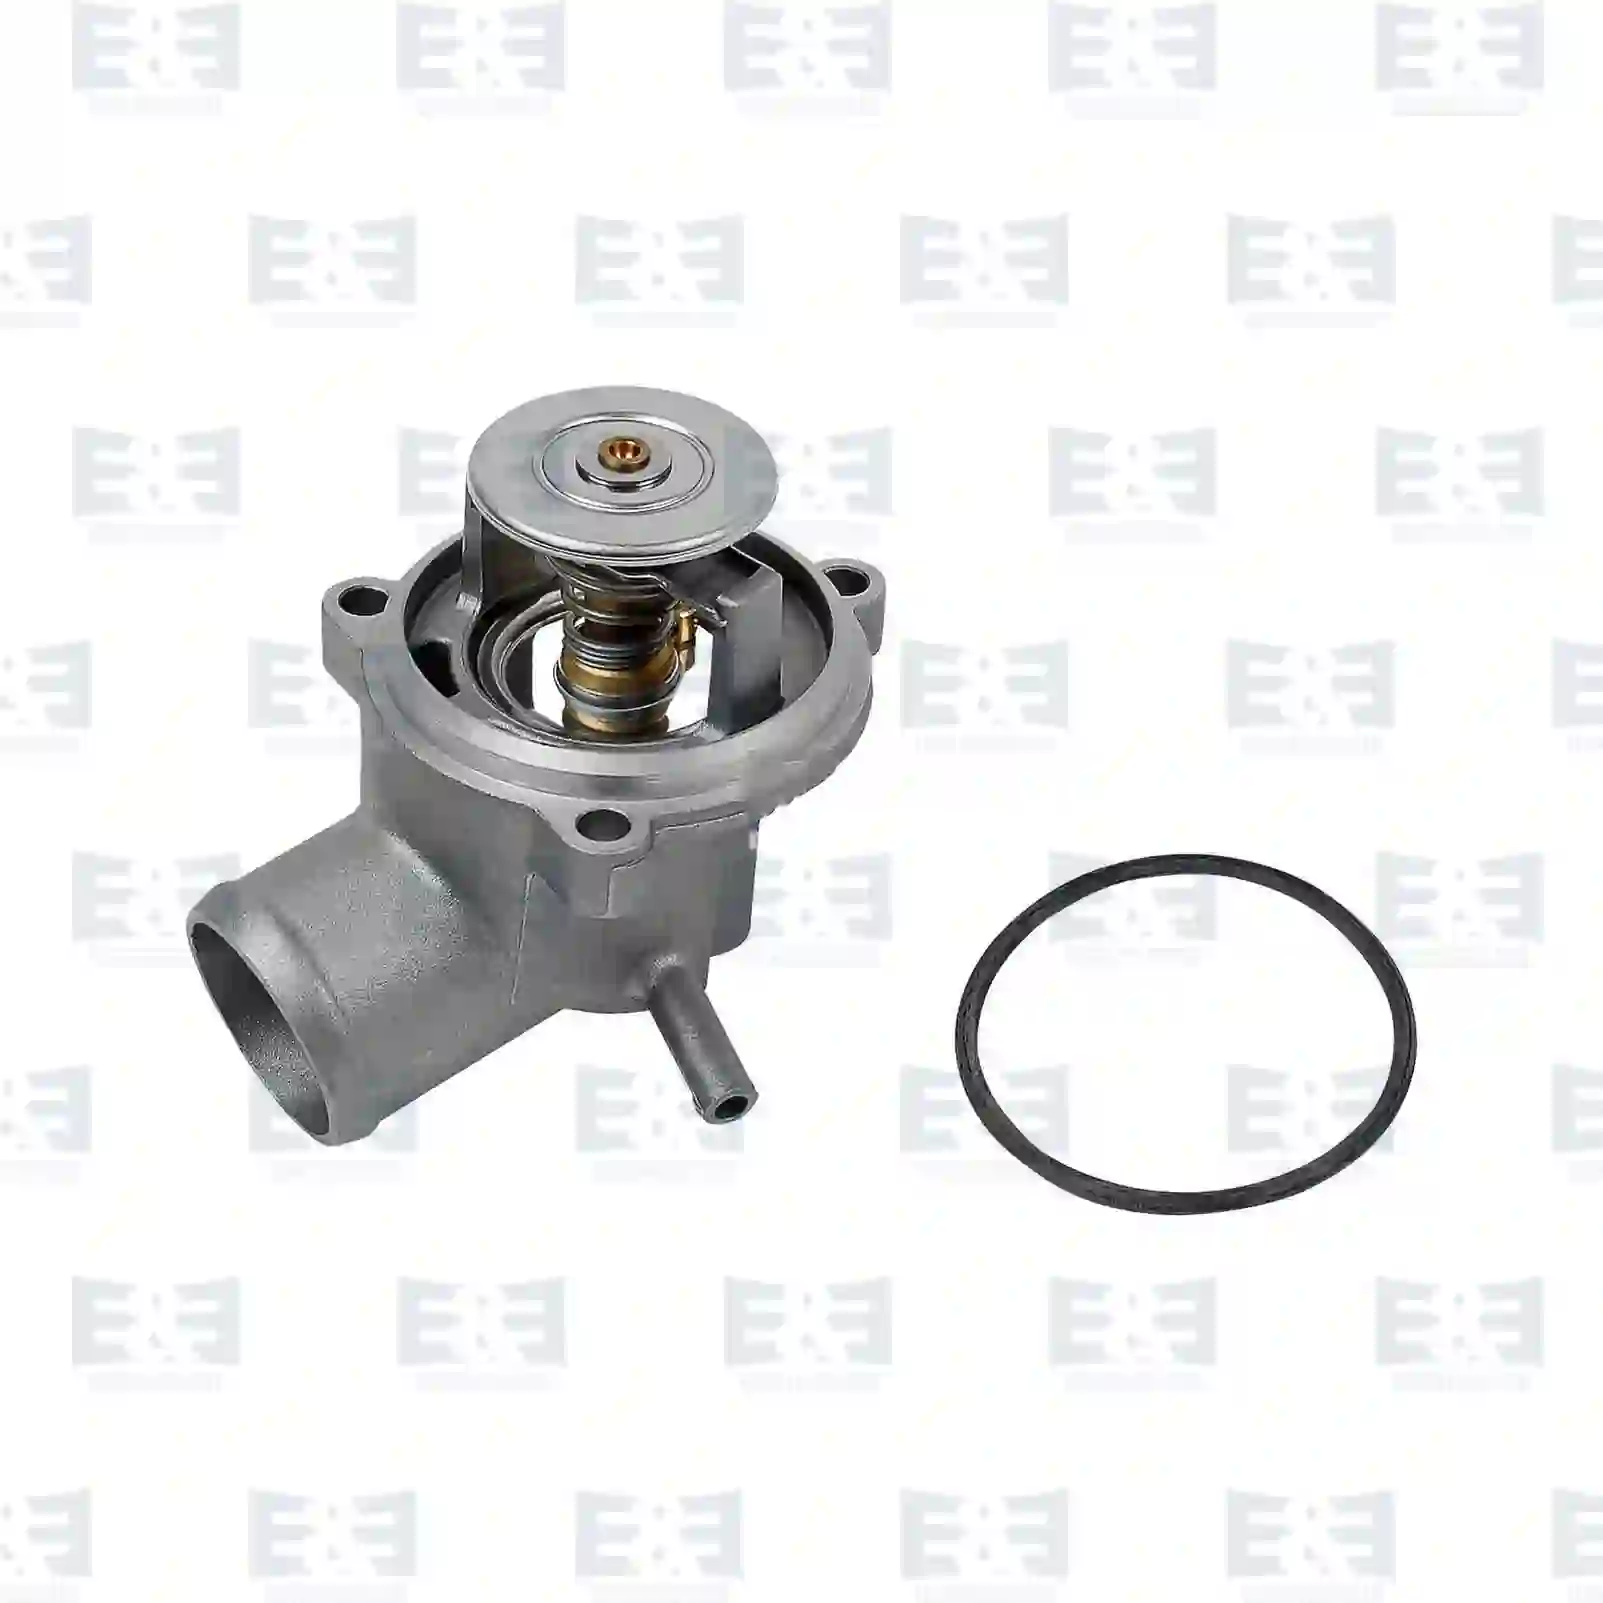 Thermostat Thermostat, EE No 2E2203715 ,  oem no:00A121113, 1112000315, 1112000415, 1112000815, 1112000915, 1112001215, 1112001515, 1112001615, 1112001715, 1112001815, 1112001915, 1112030275, 1112030375, 1112030575, 1112030675, 1112030875, 1112030915, 1112030975, 1112031075, 00A121113, 00A121113, 1112030875, 1612033375, 1612033775, 00A121113, 00A12111371, ZG00672-0008 E&E Truck Spare Parts | Truck Spare Parts, Auotomotive Spare Parts